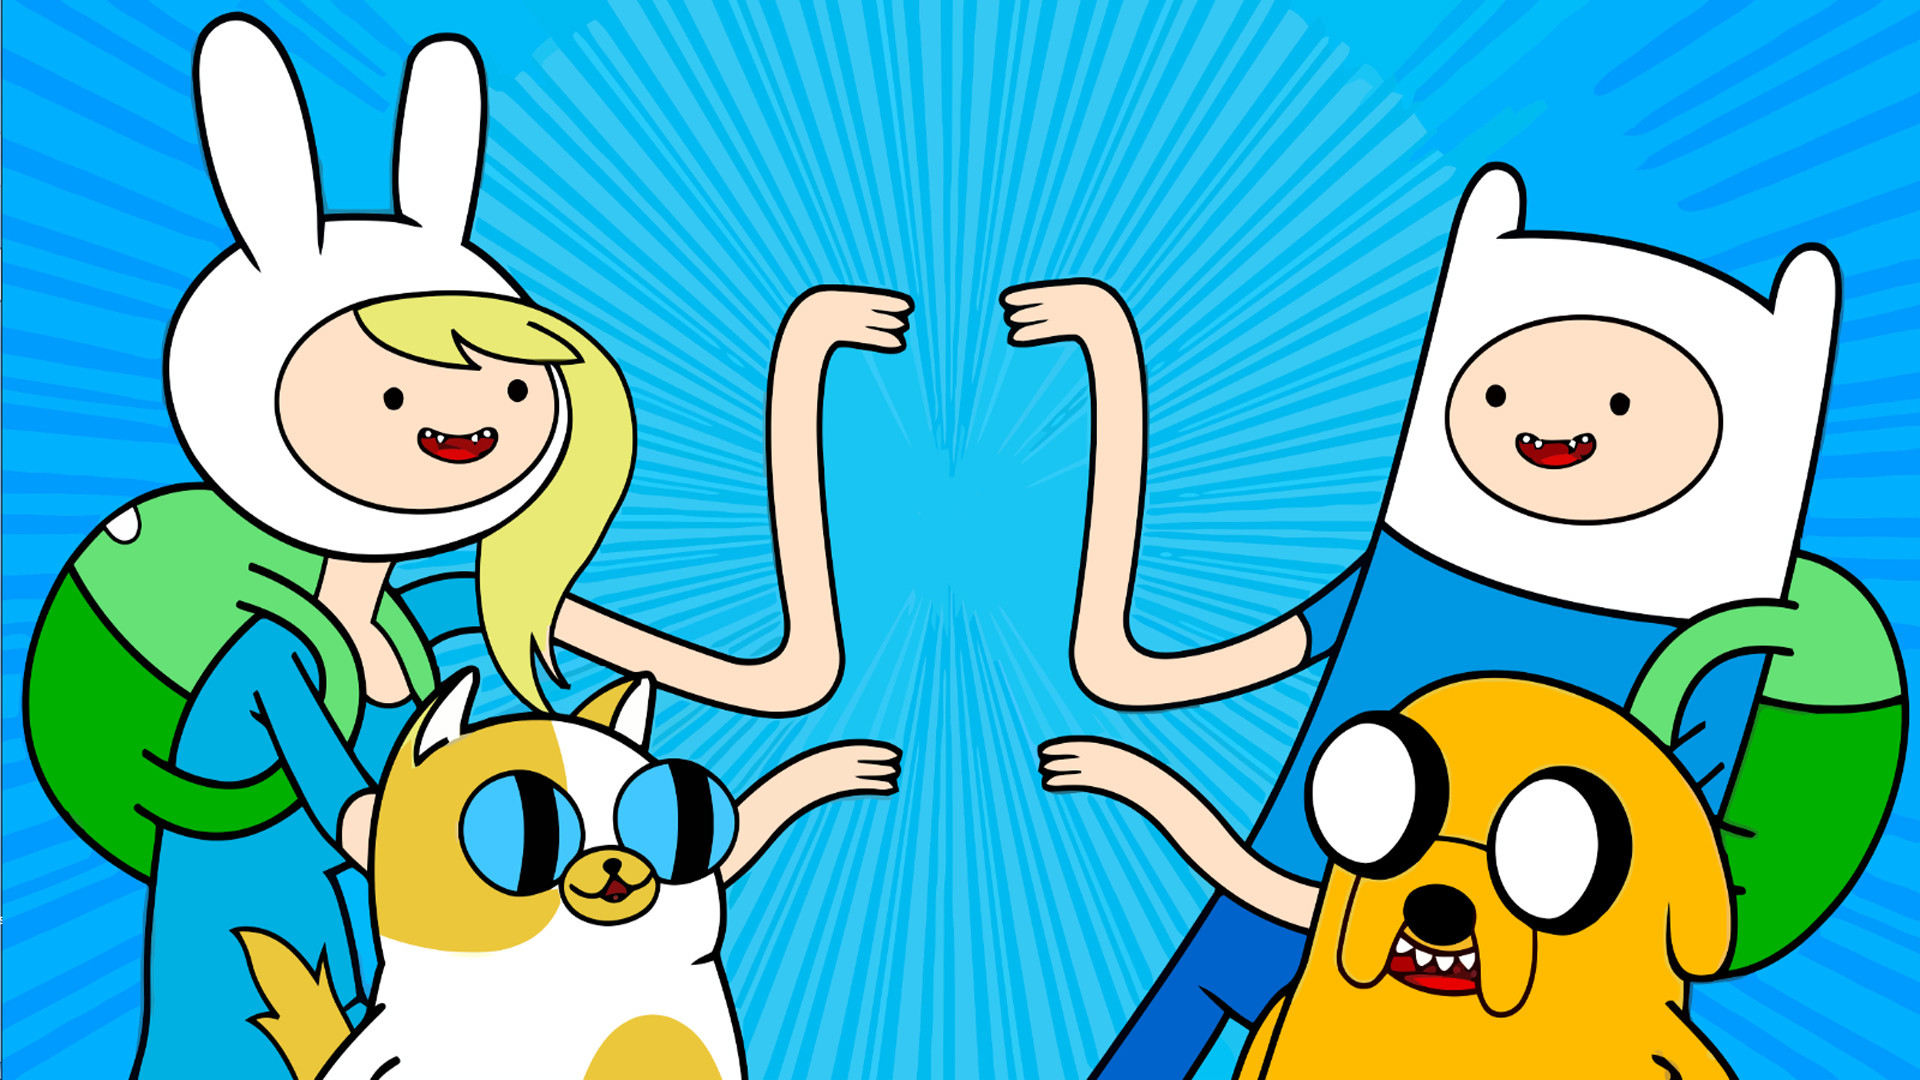 1920x1080 Adventure Time HD Wallpaper | Let's Talk About